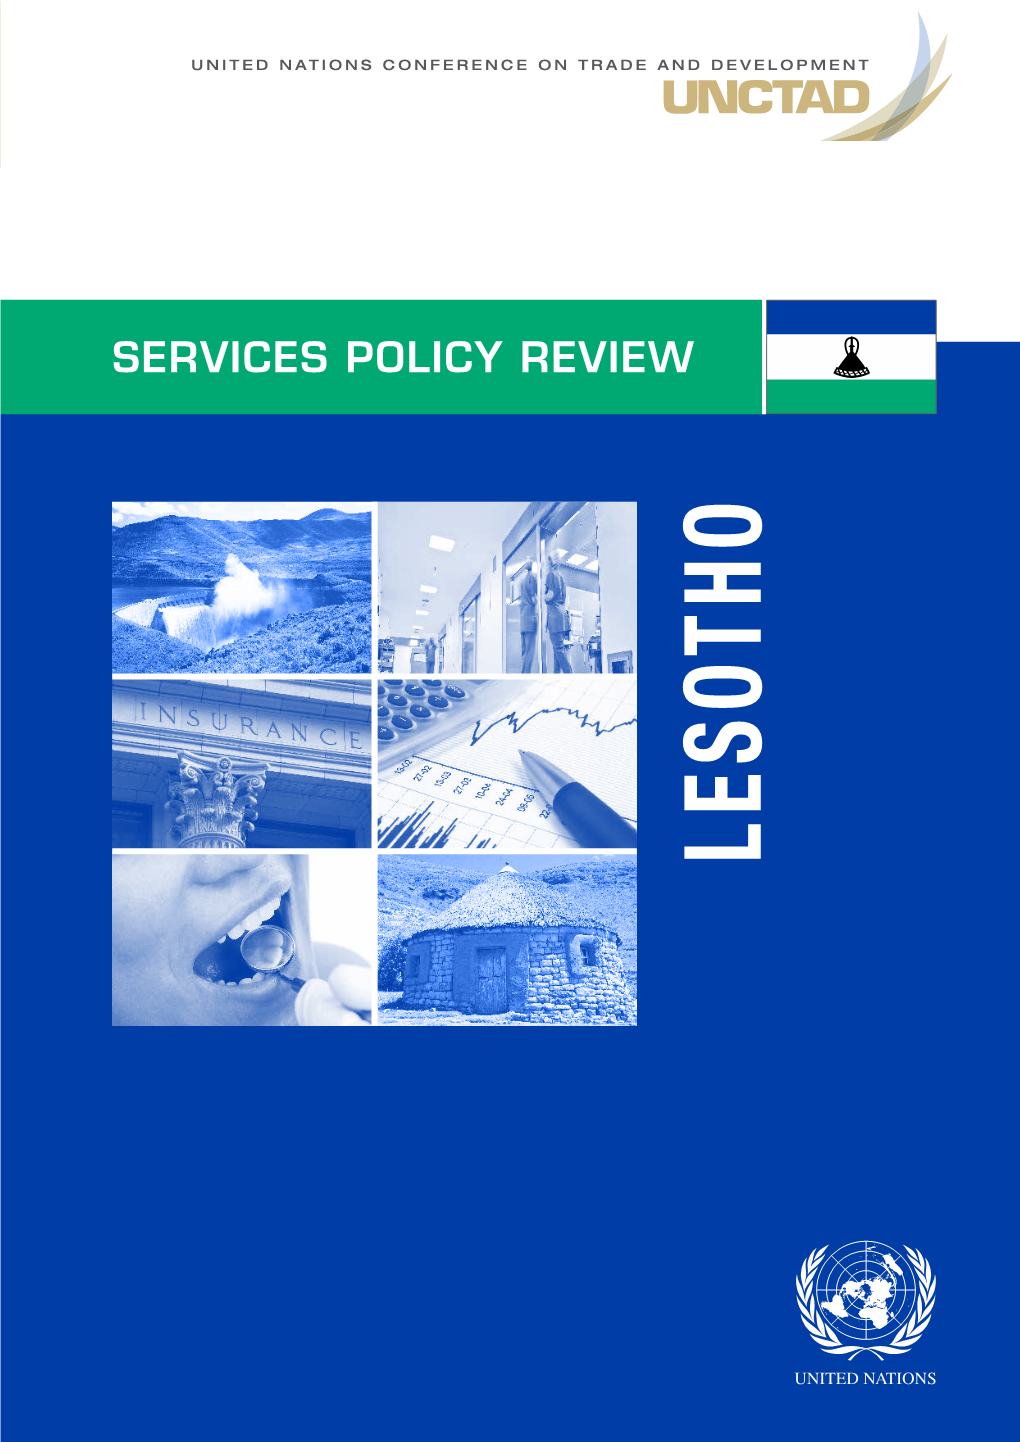 Services Policy Review of Lesotho